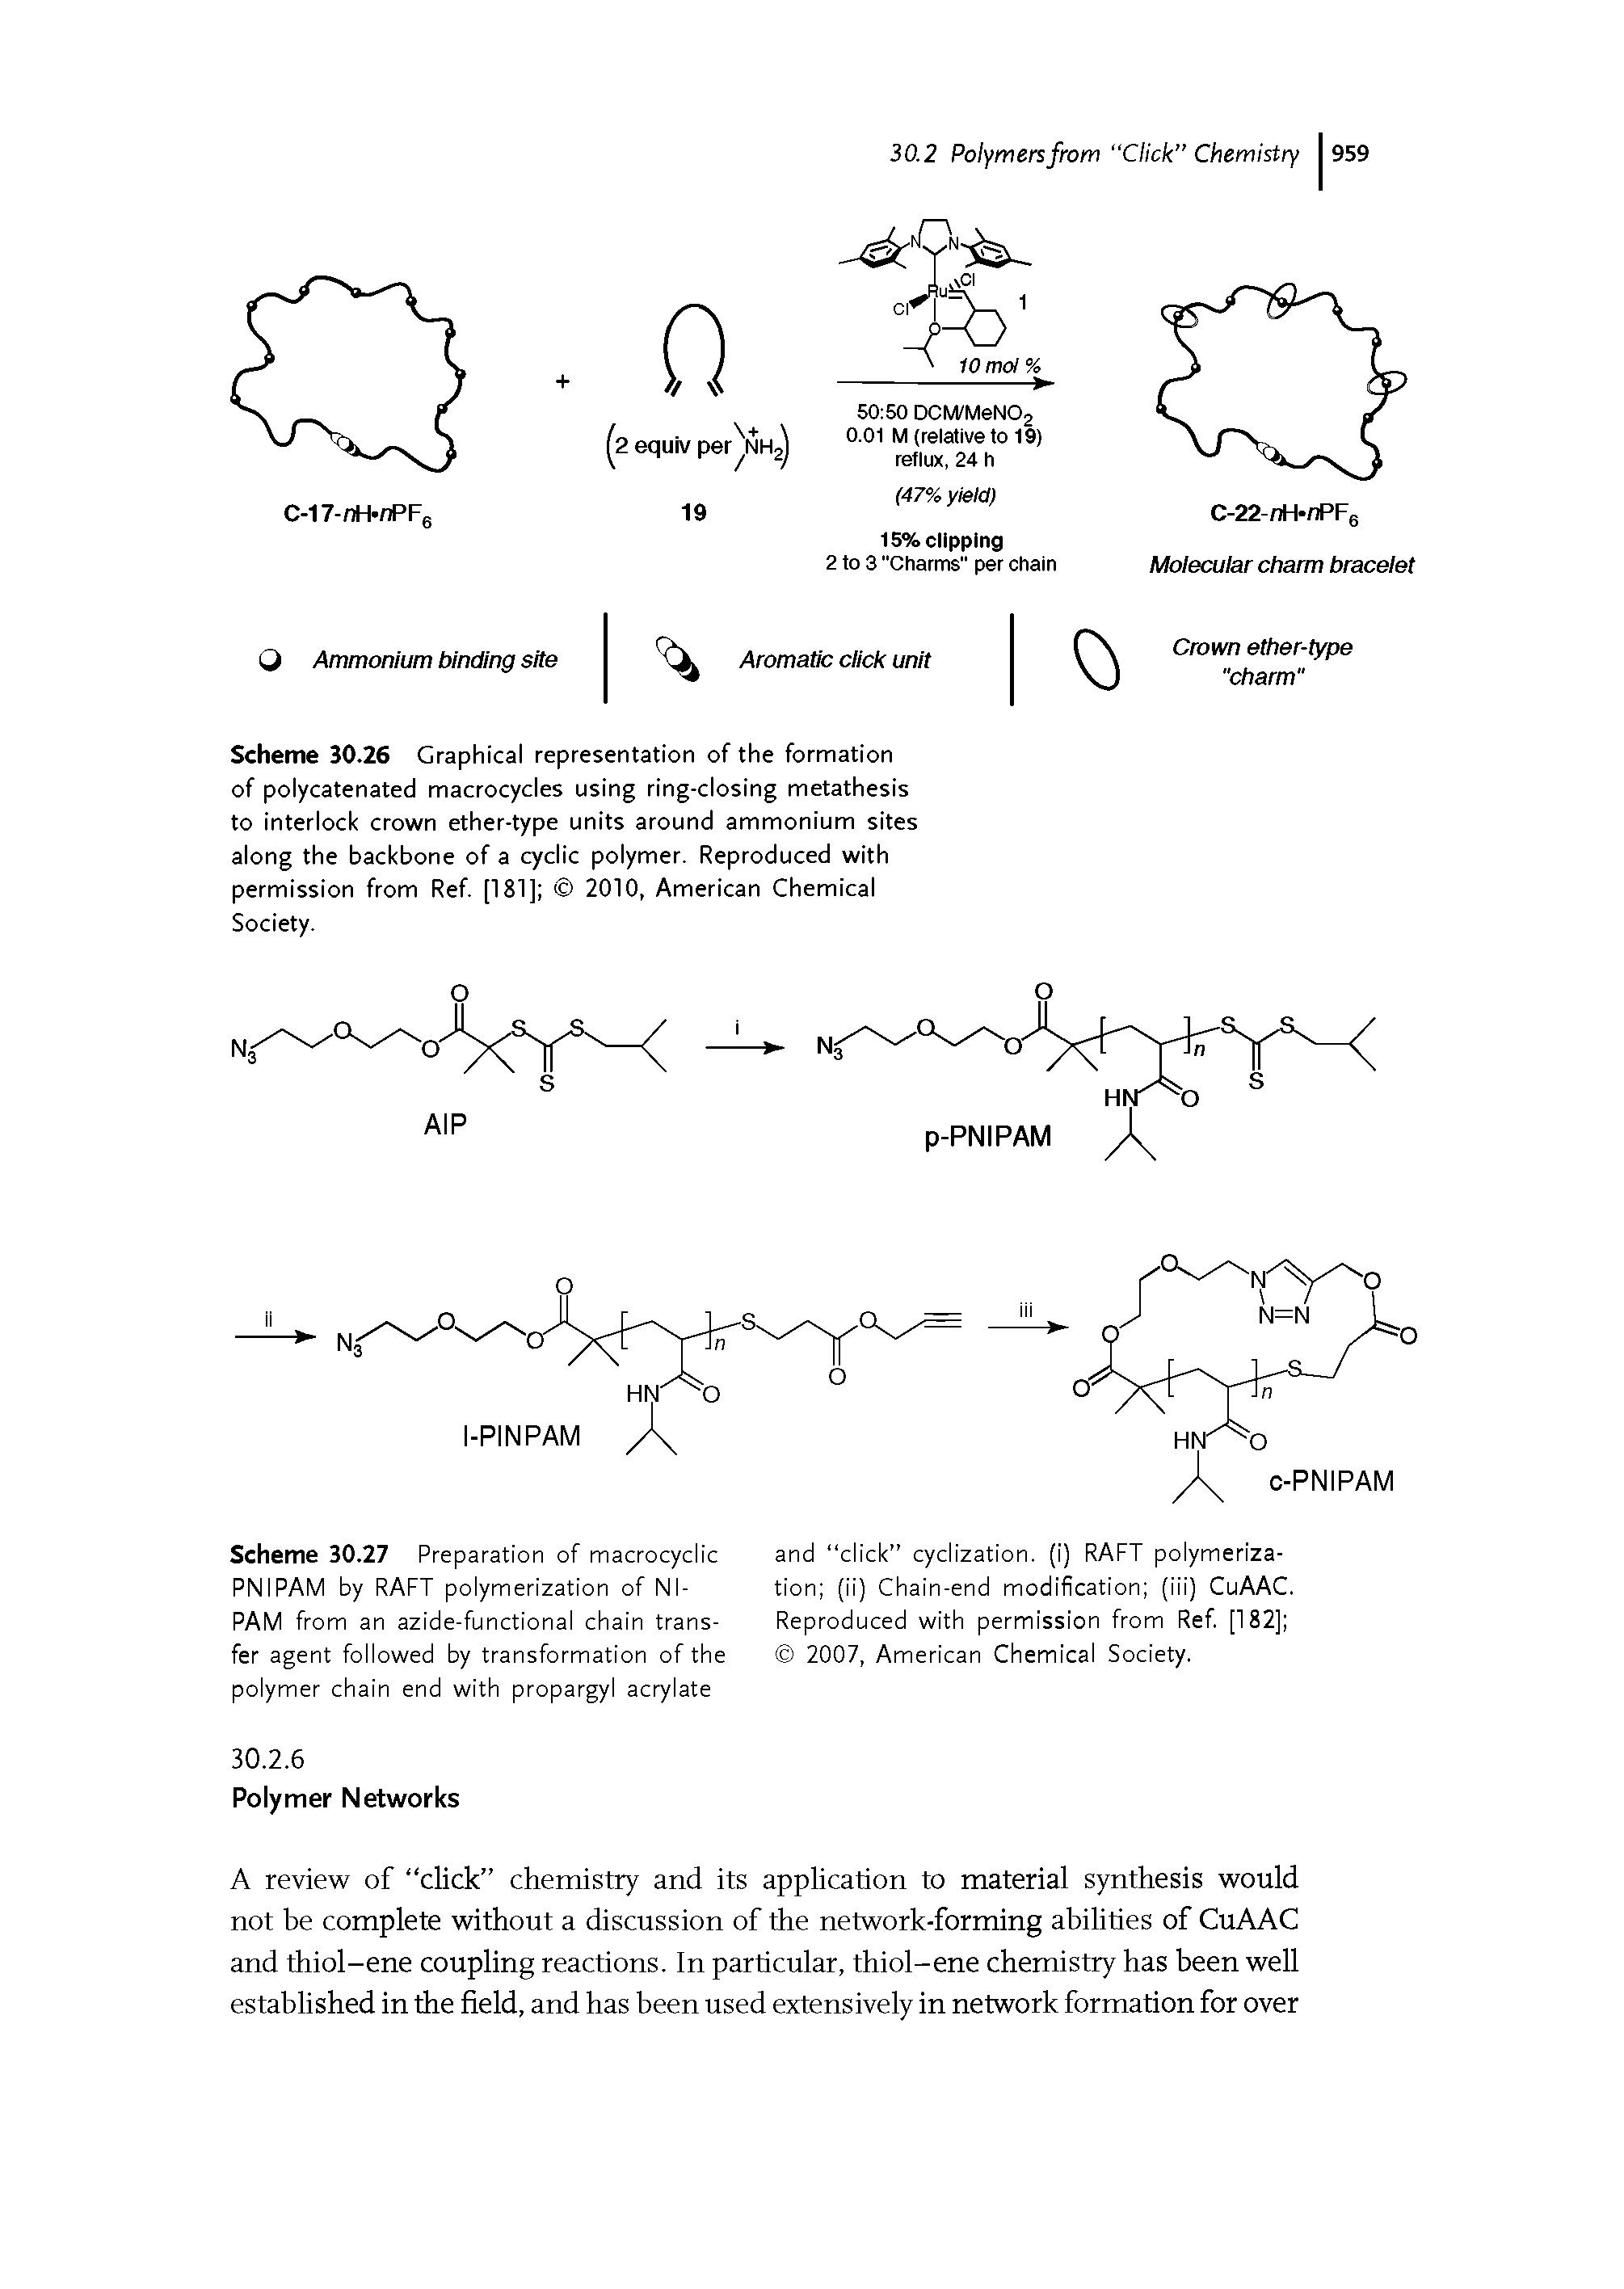 Scheme 30.26 Graphical representation of the formation of polycatenated macrocycles using ring-closing metathesis to interlock crown ether-type units around ammonium sites along the backbone of a cyclic polymer. Reproduced with permission from Ref. [181] 2010, American Chemical Society.